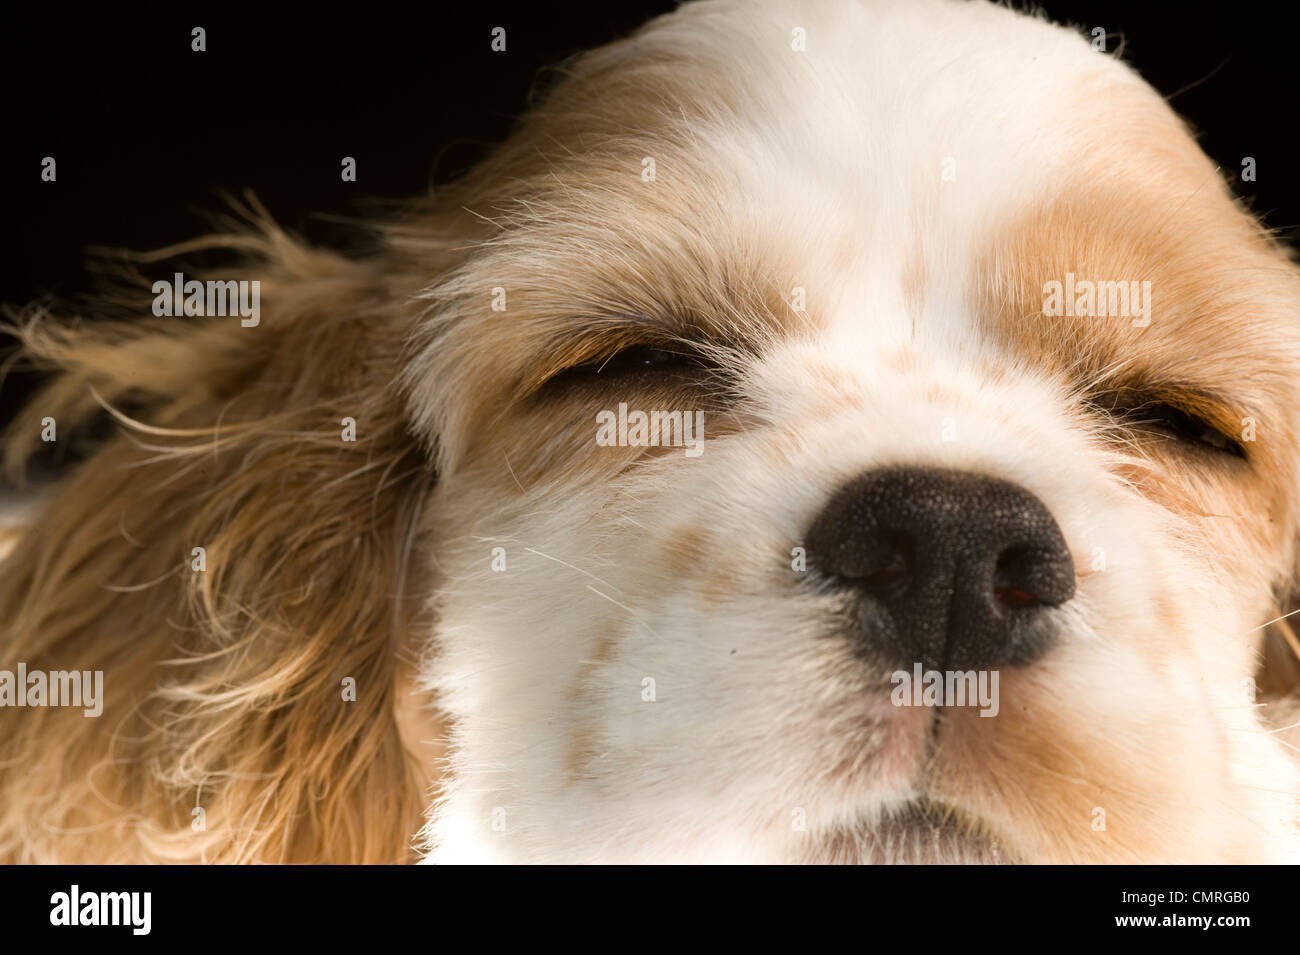 This is photo of a sleeping Cocker Spaniel puppy. Stock Photo